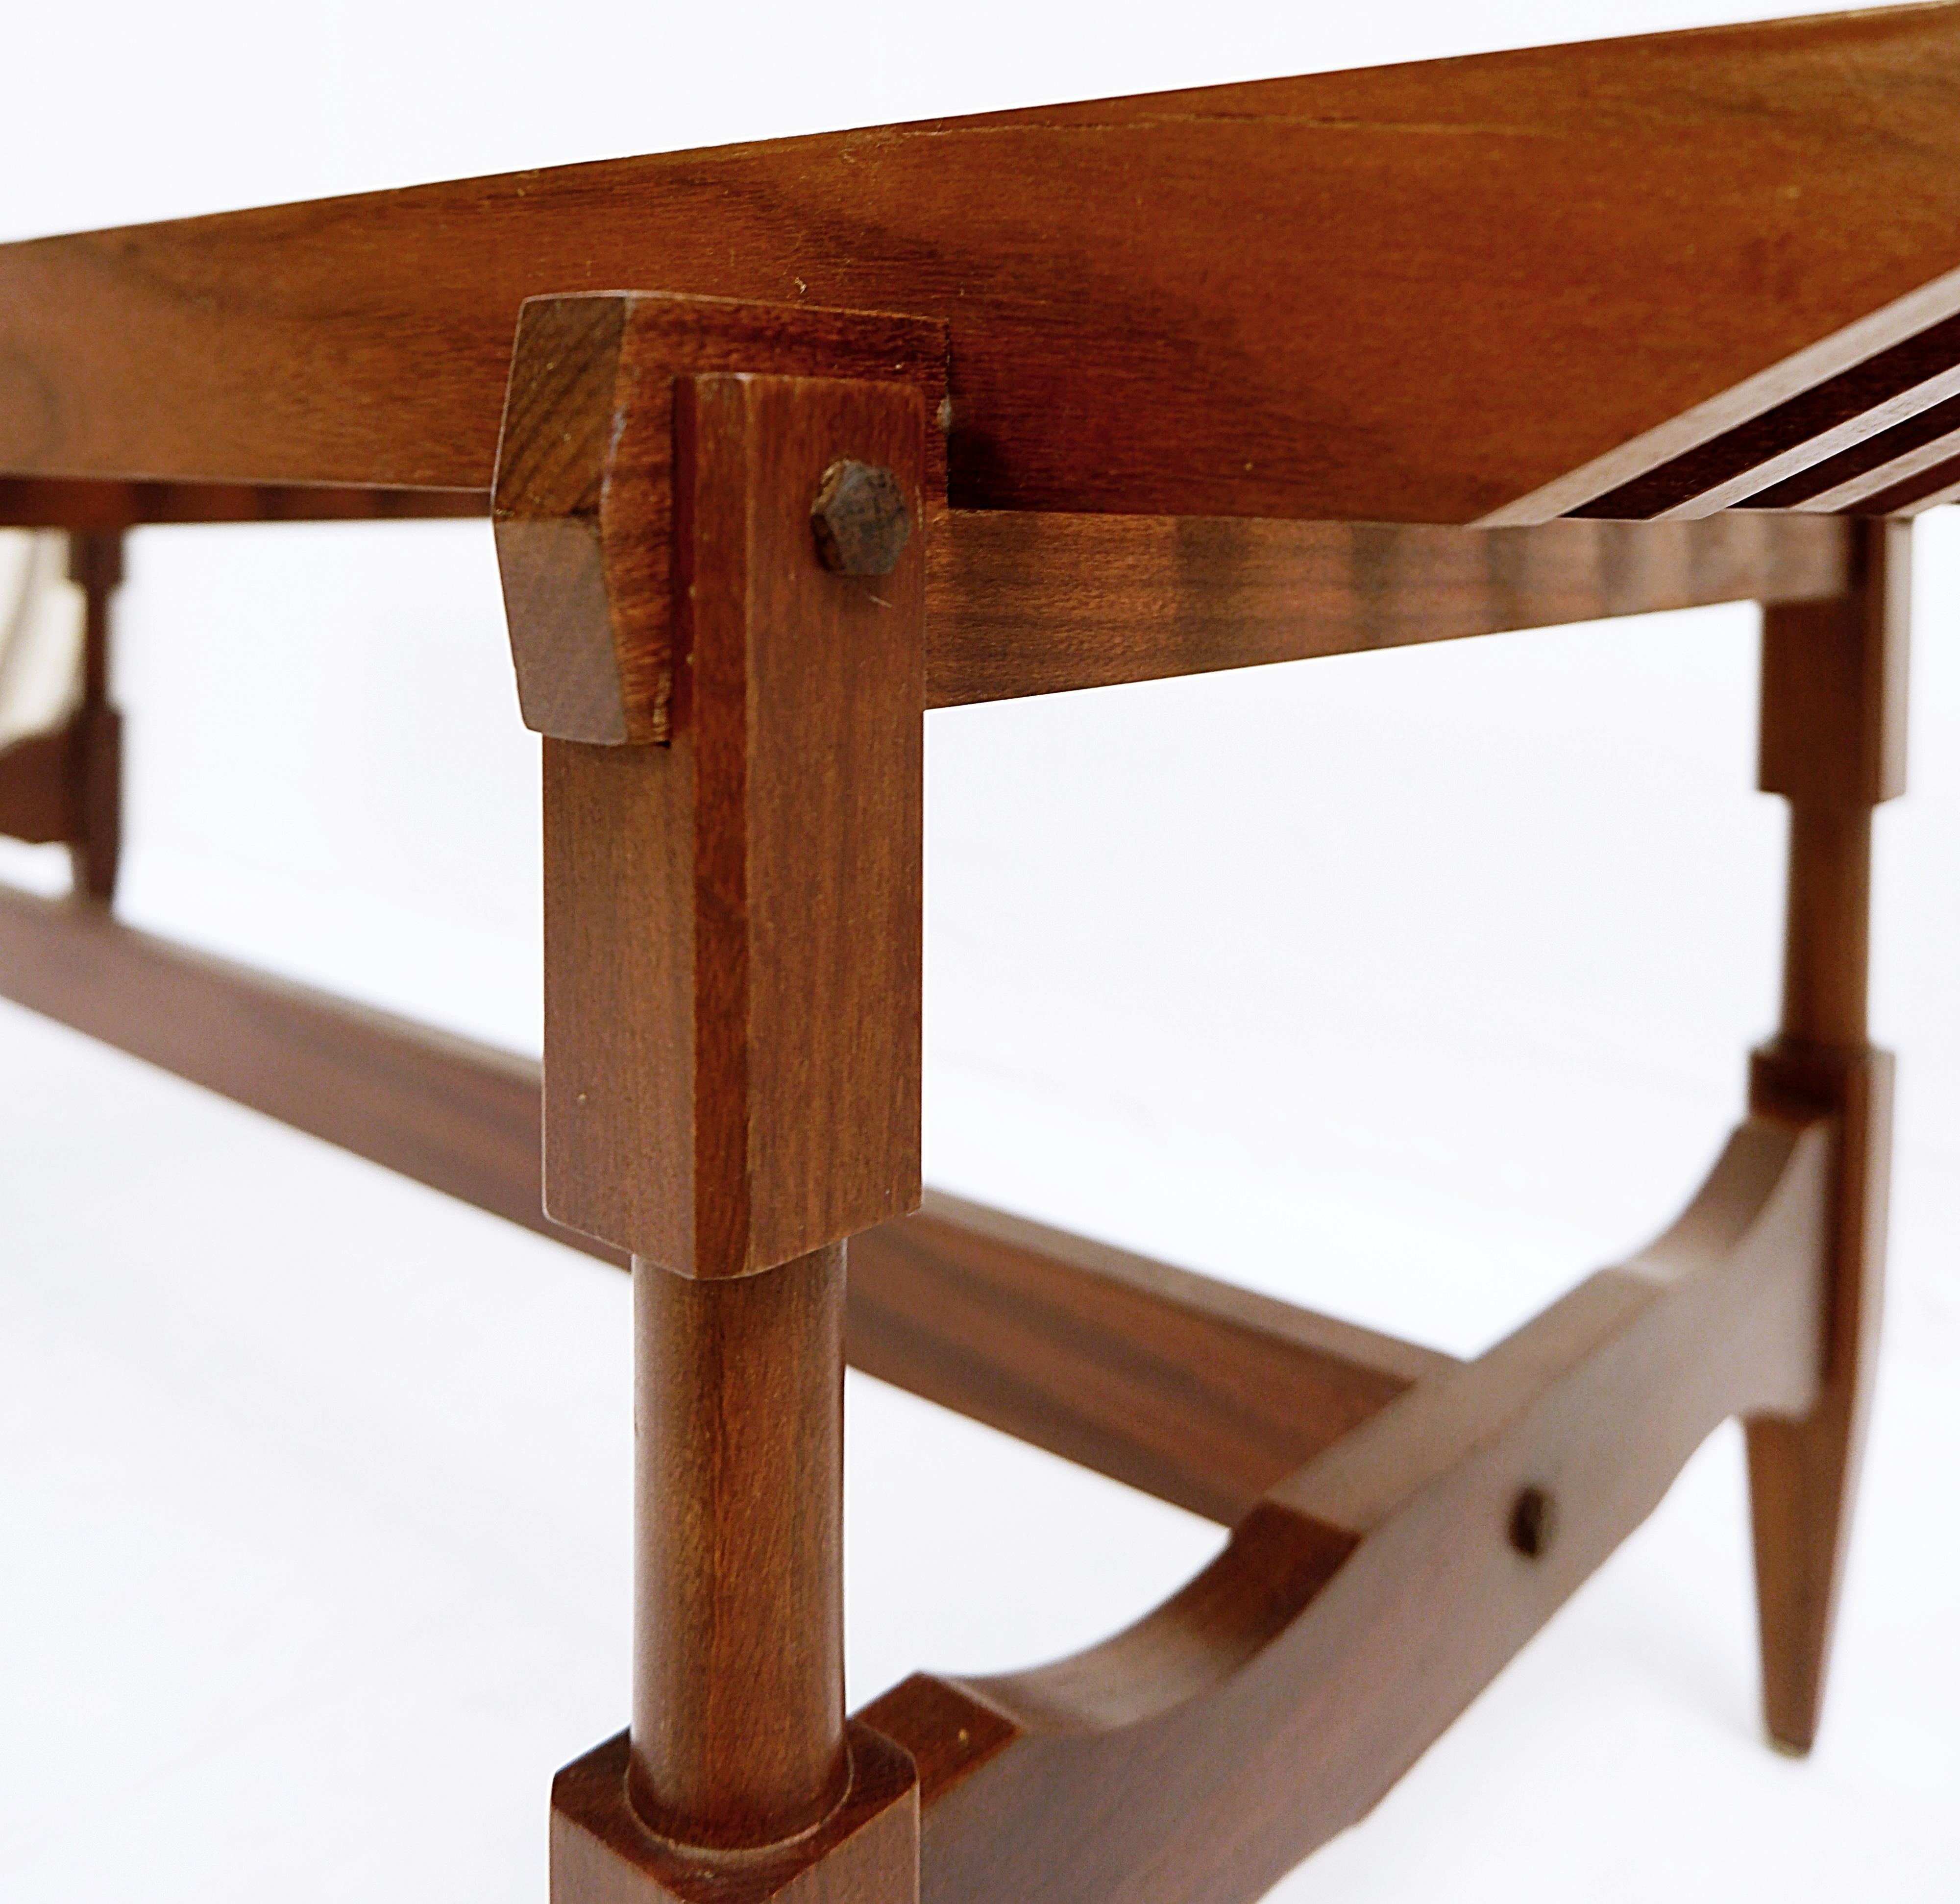 Pair of Mid-century wood Bench by Ico & Luisa Parisi - 1950s For Sale 1